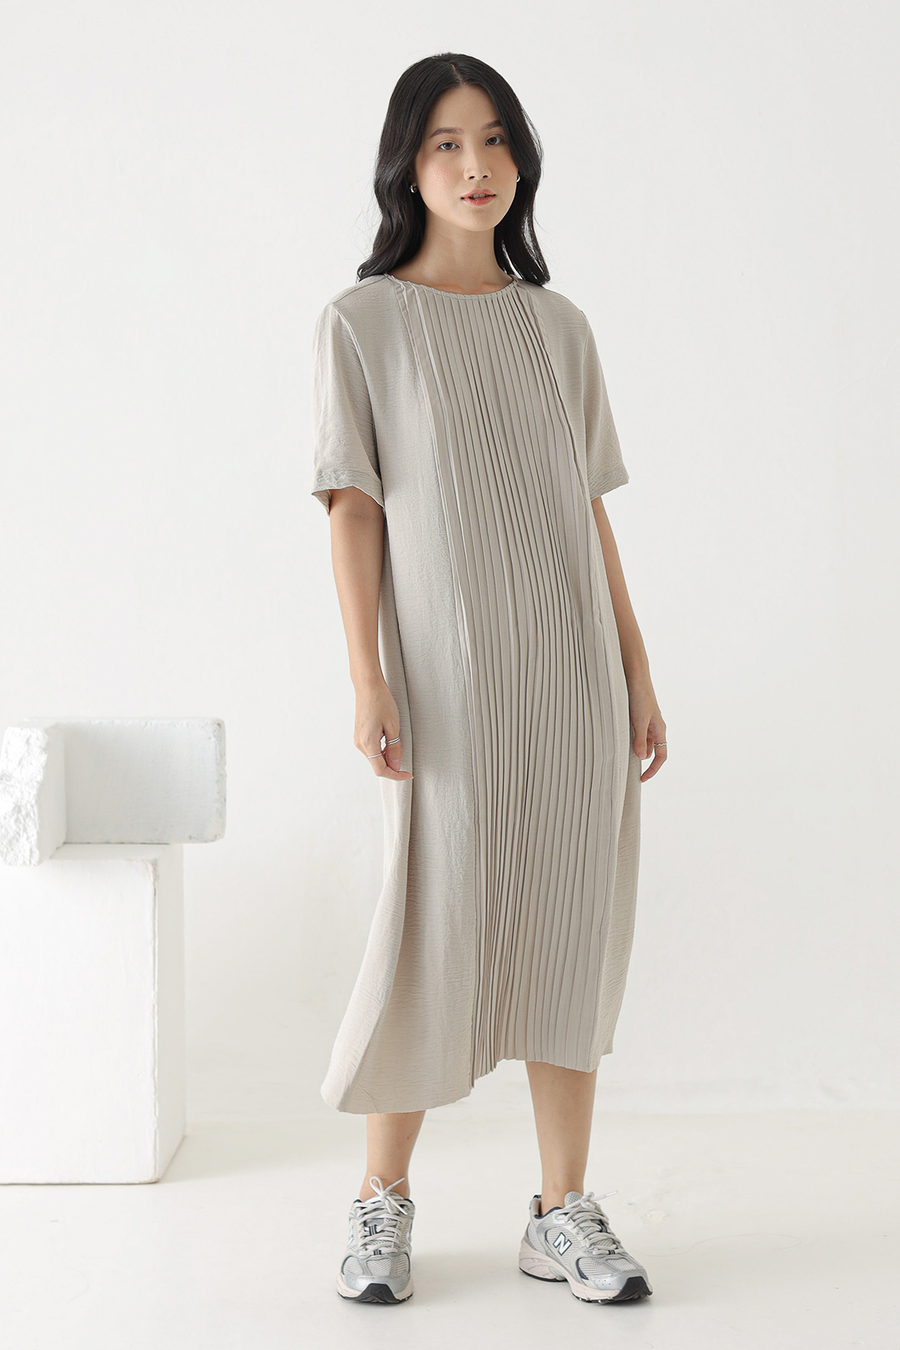 Feather Inlet Dress